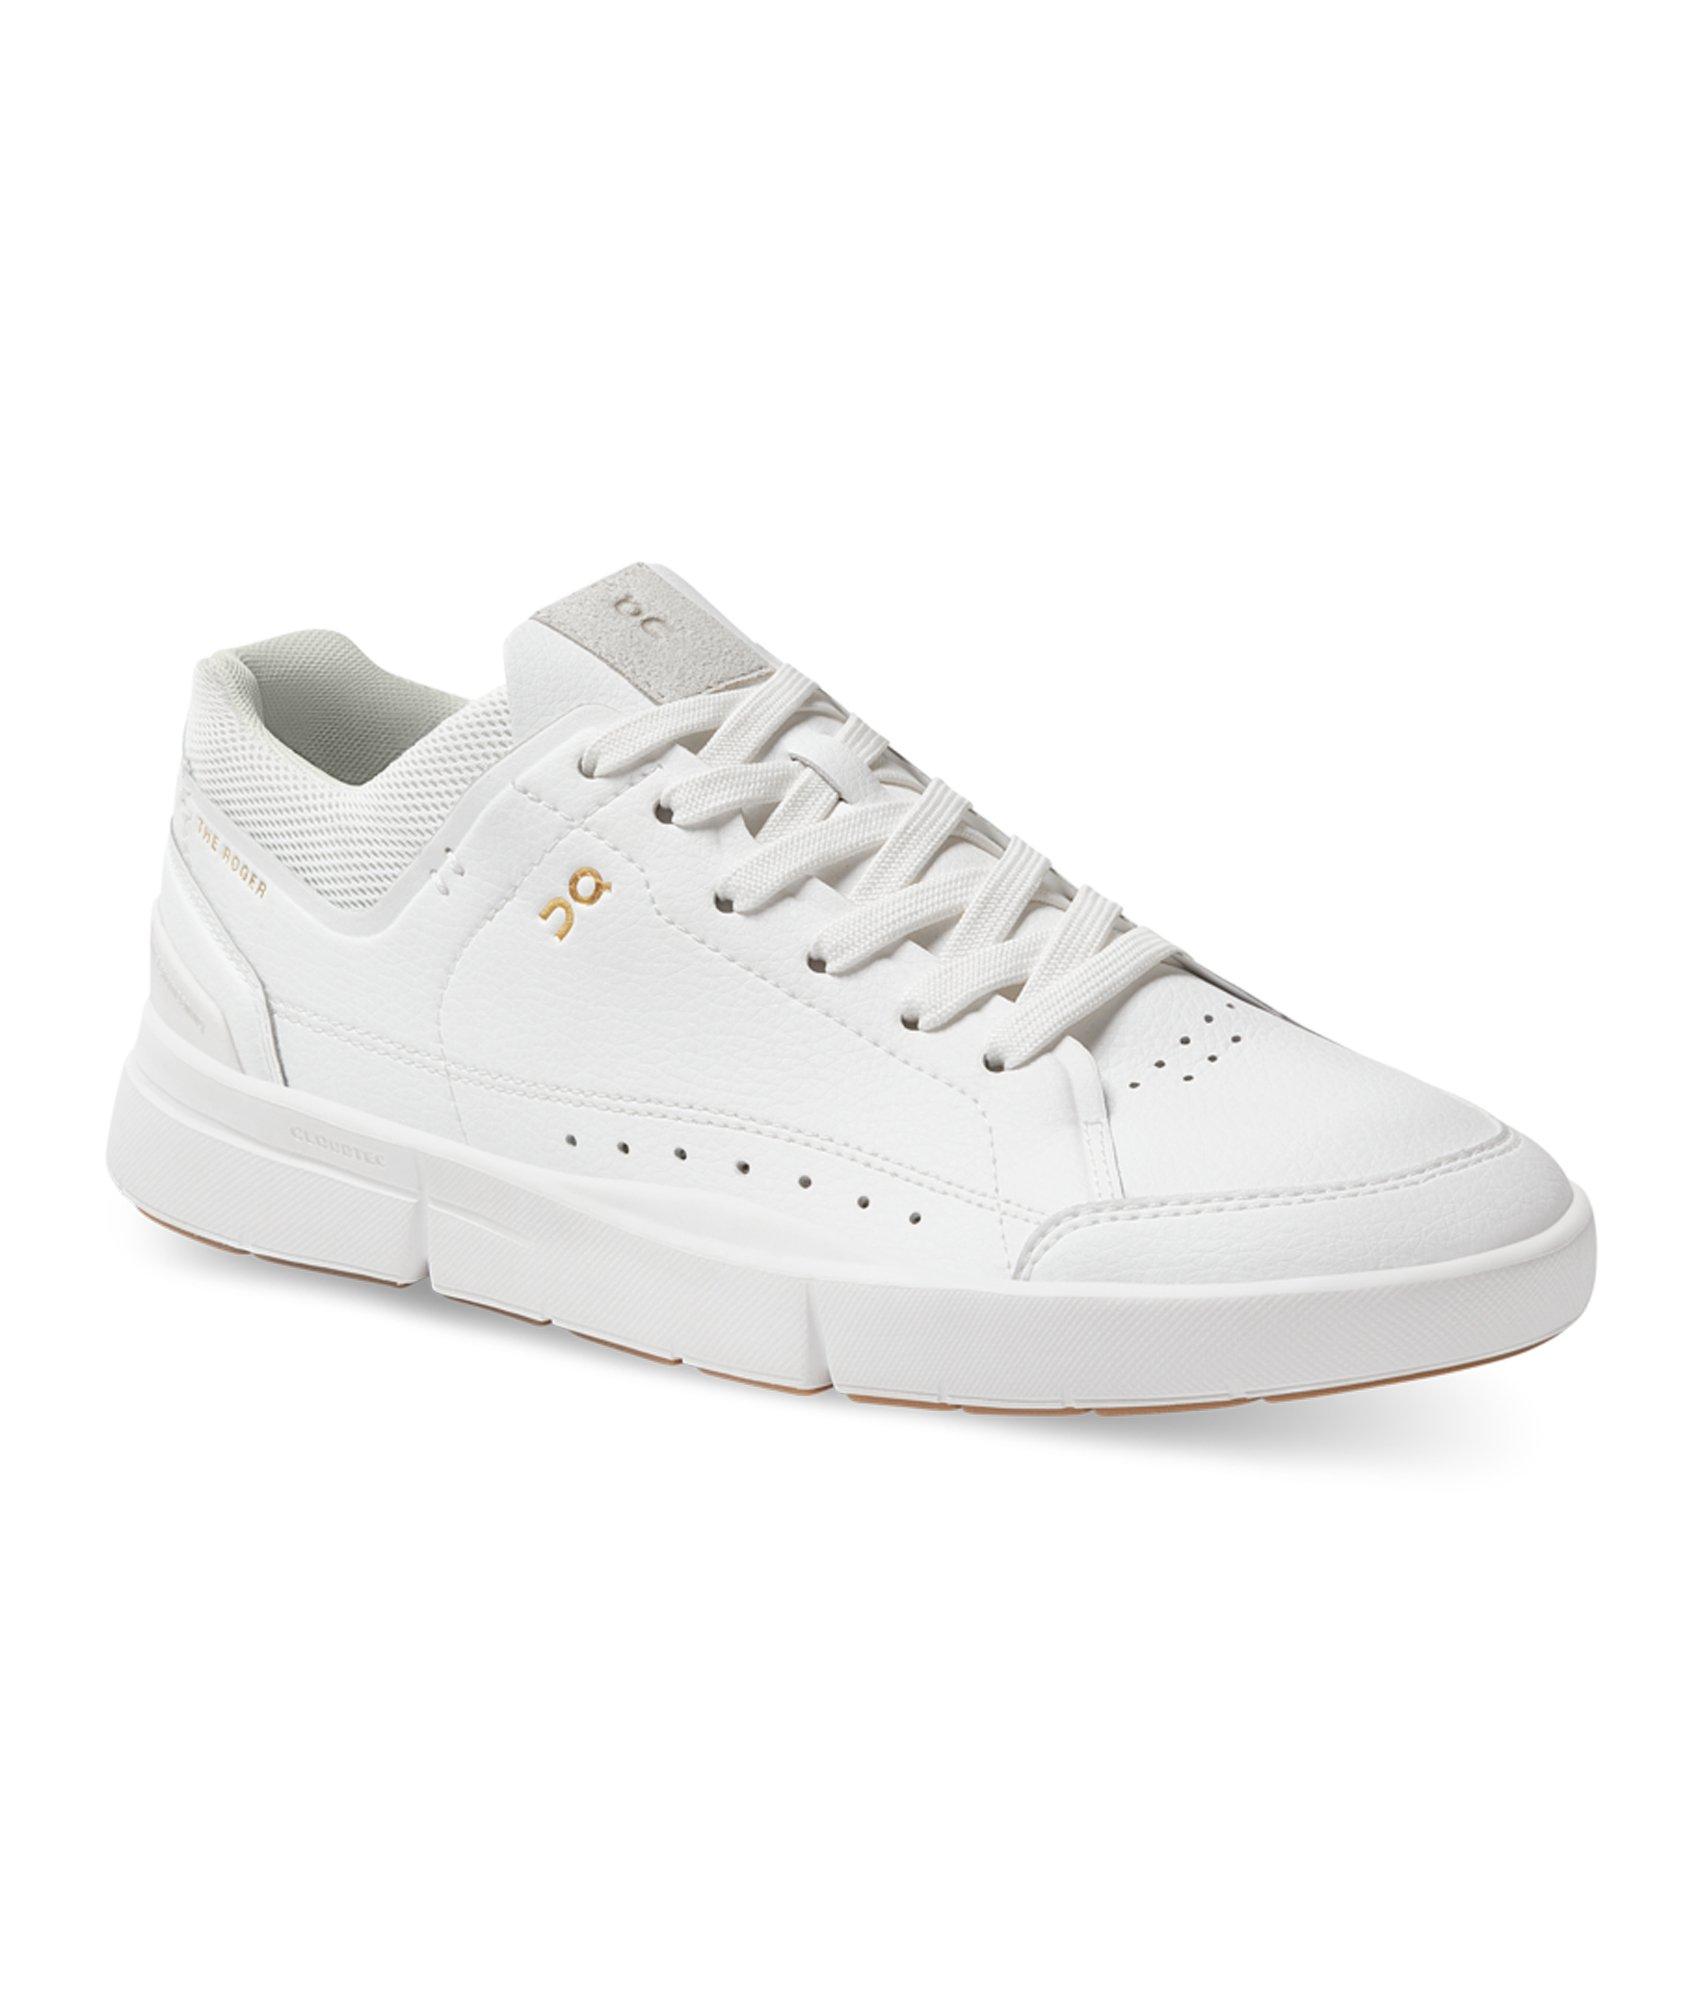 THE ROGER Centre Court Sneakers image 0